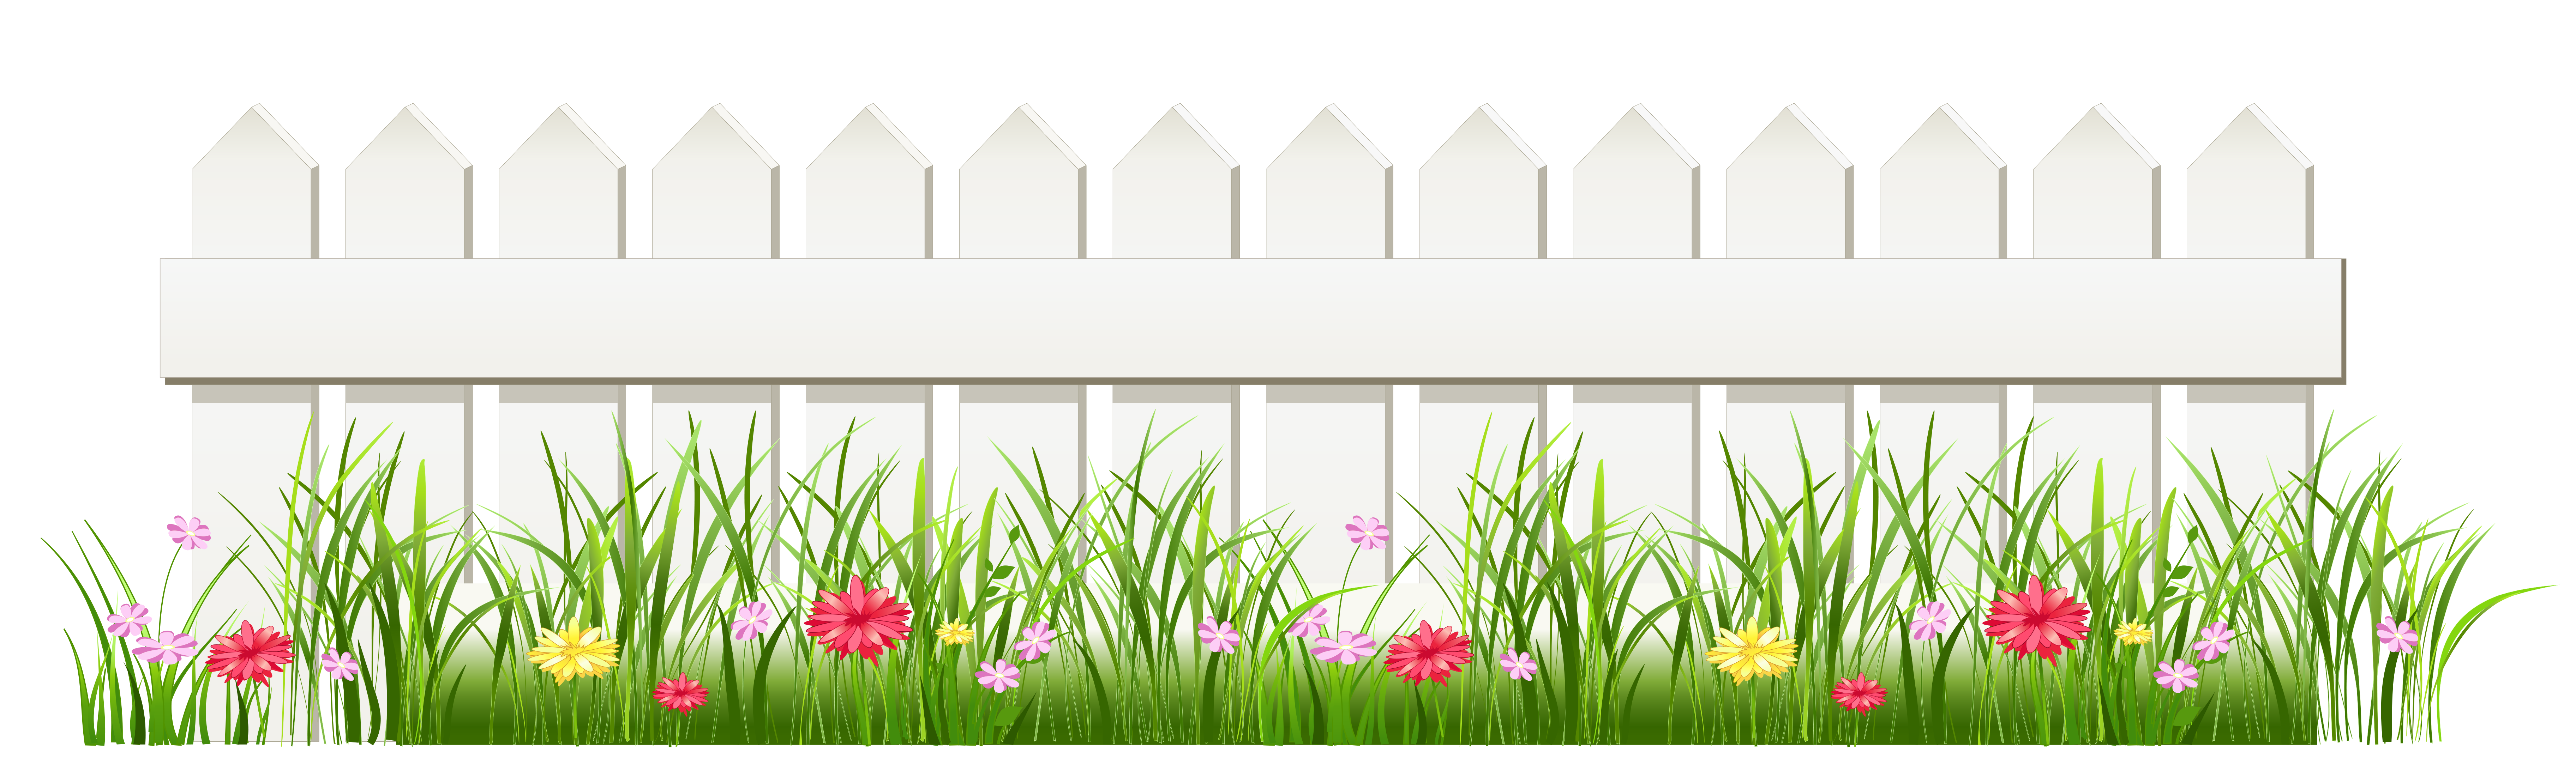 Flowers clipart fence. Transparent white with grass